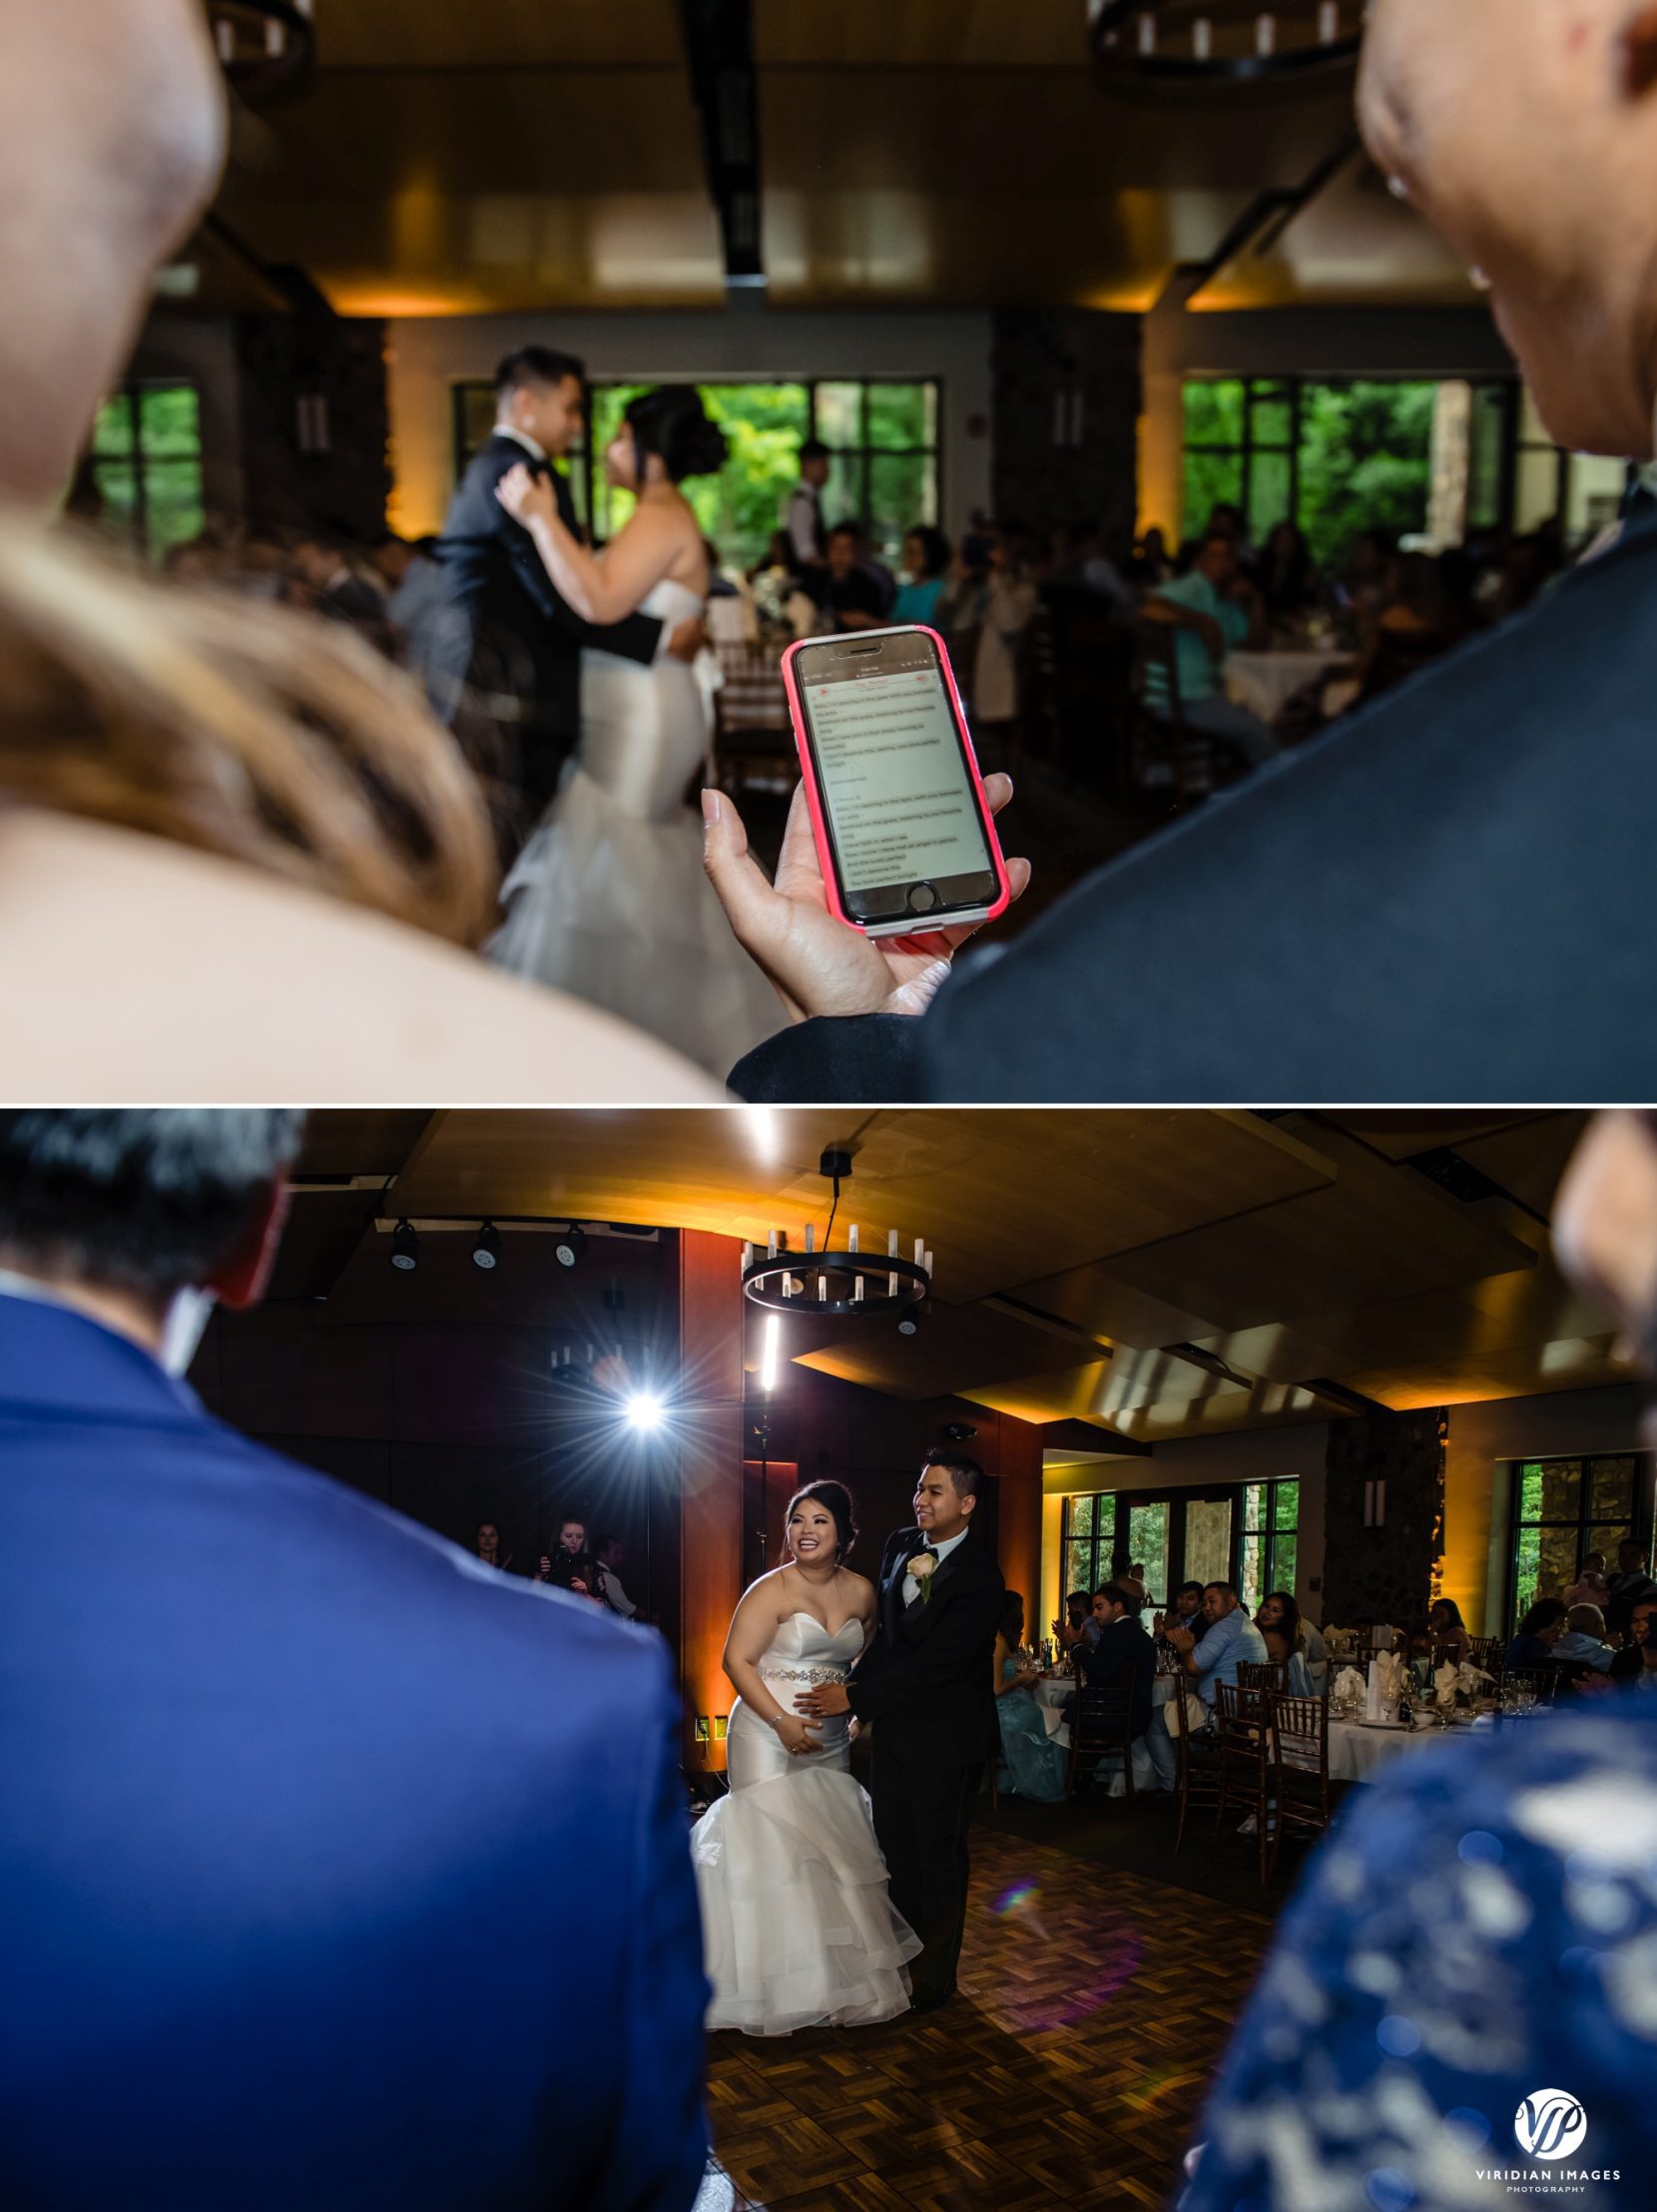 bridal party reading lyrics on cell phone during singing of first dance song bride and groom a cappella